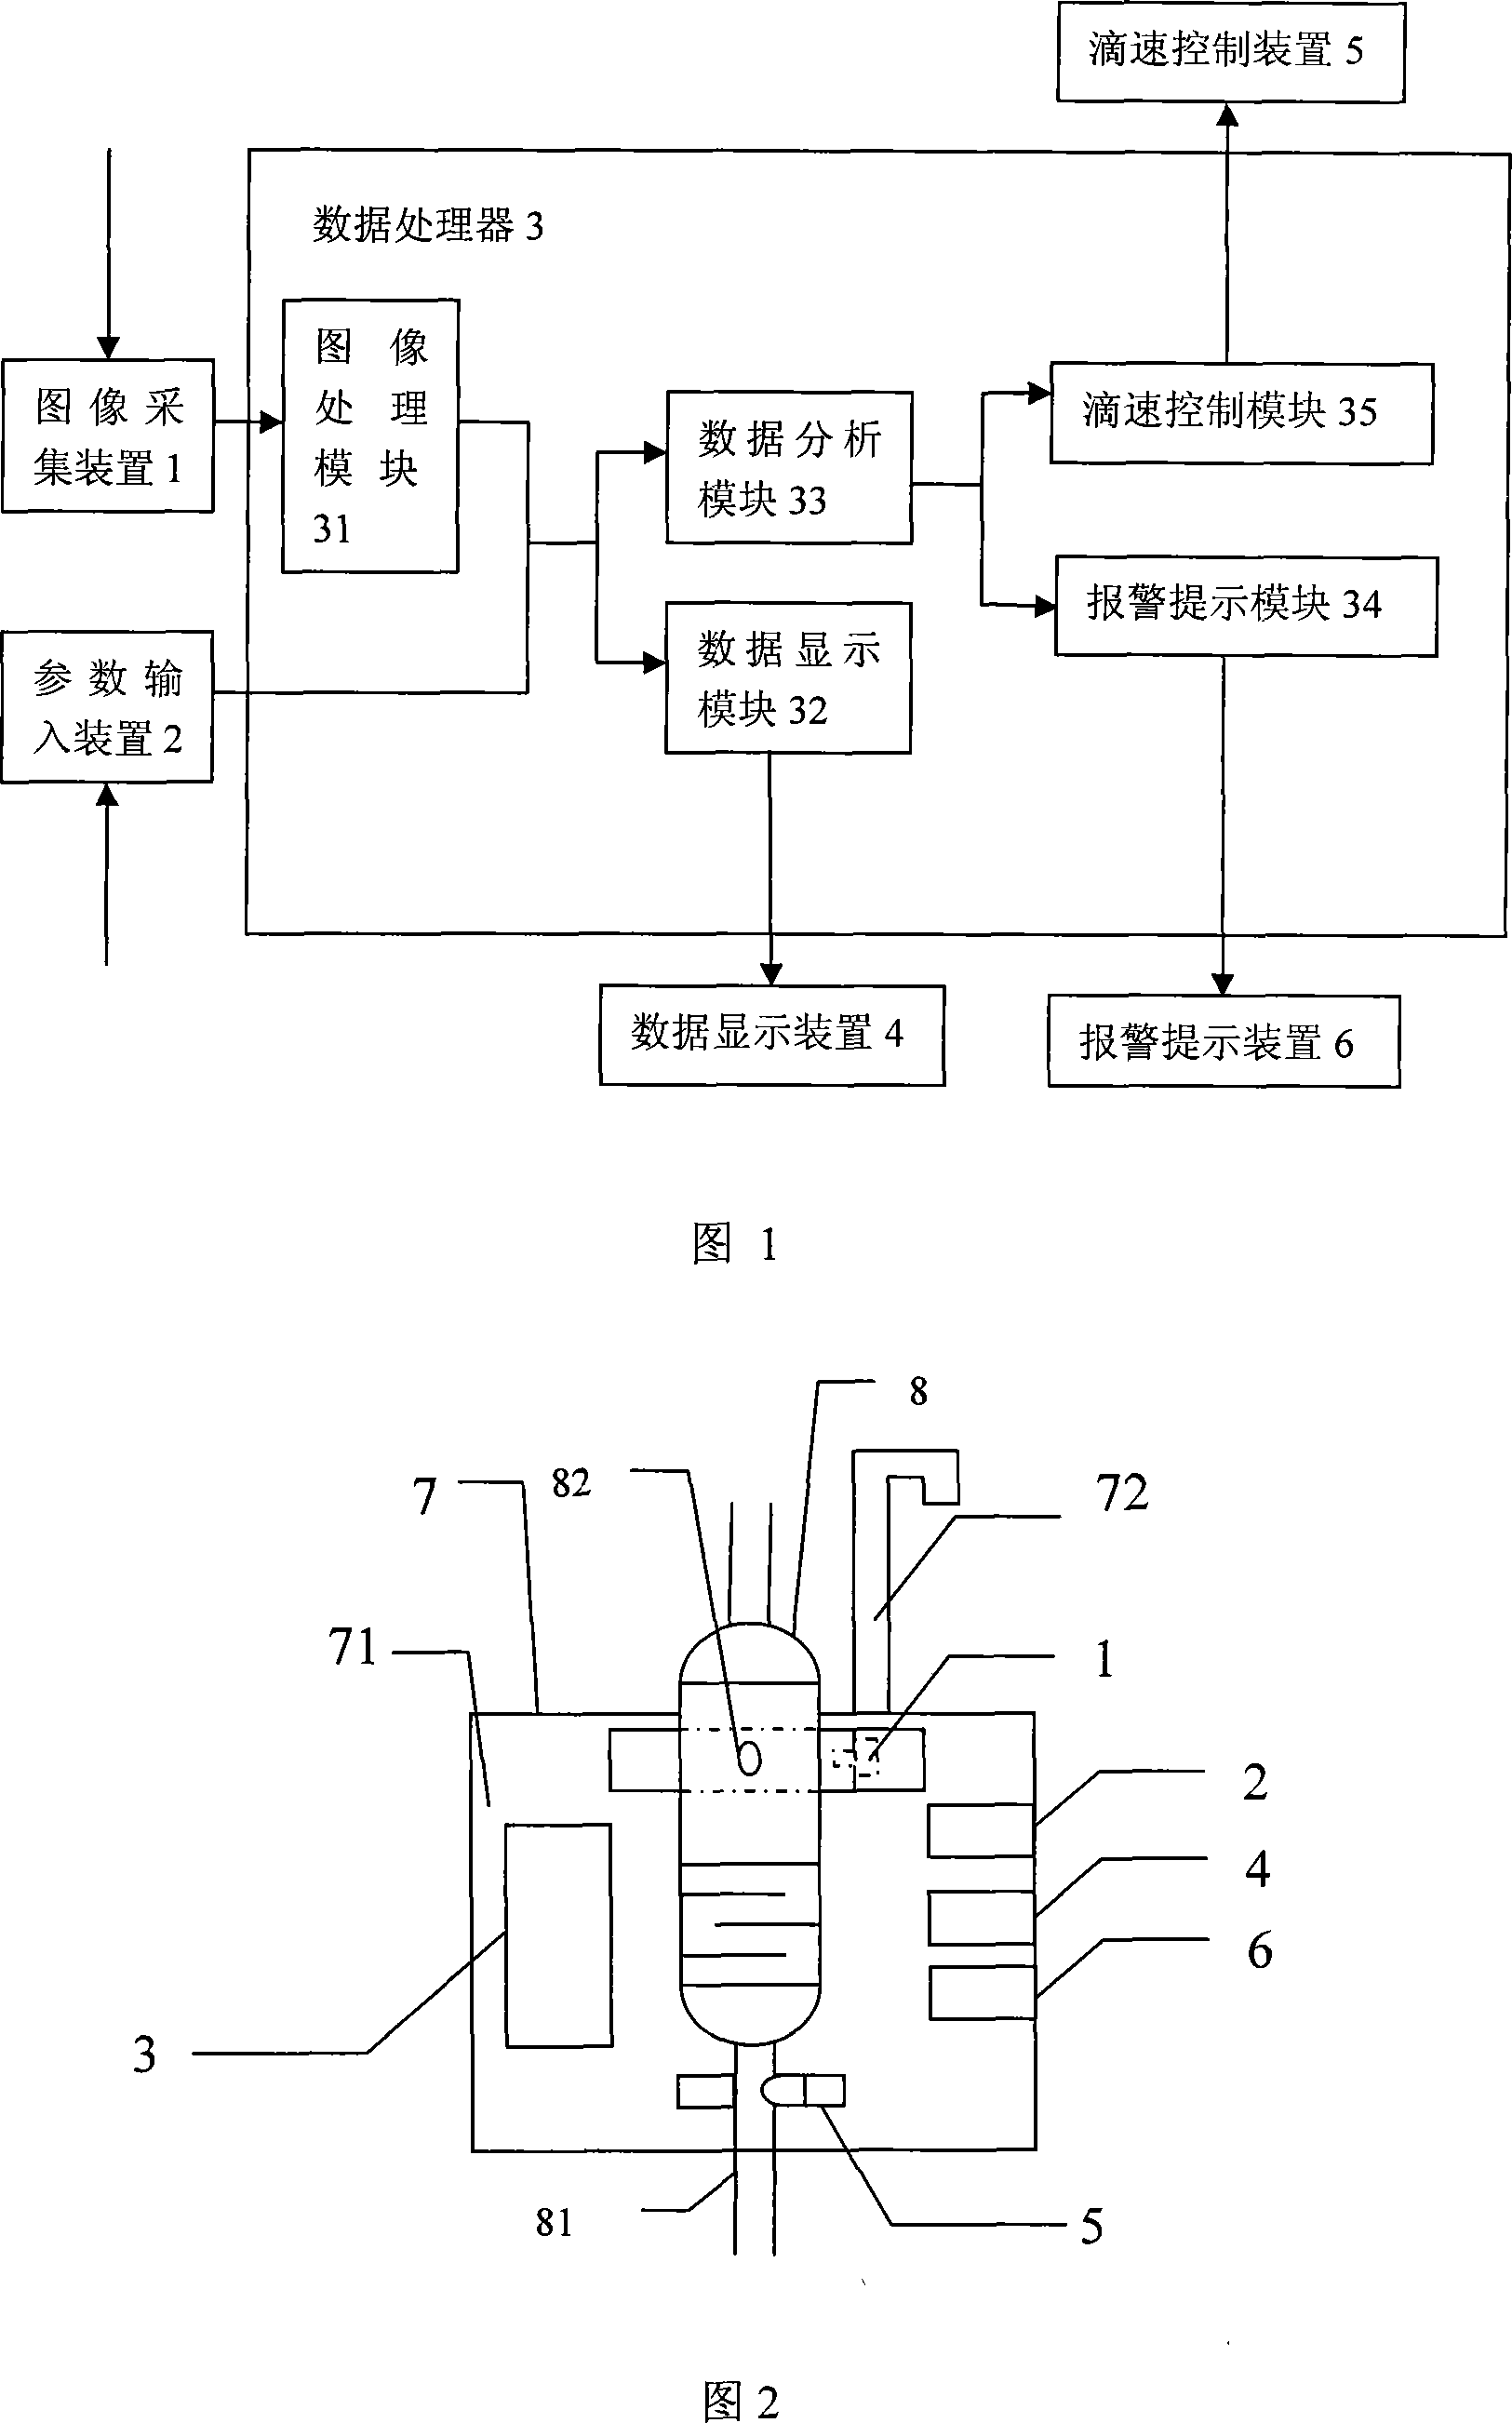 System for monitoring and controlling medical transfusion speed based on machine vision